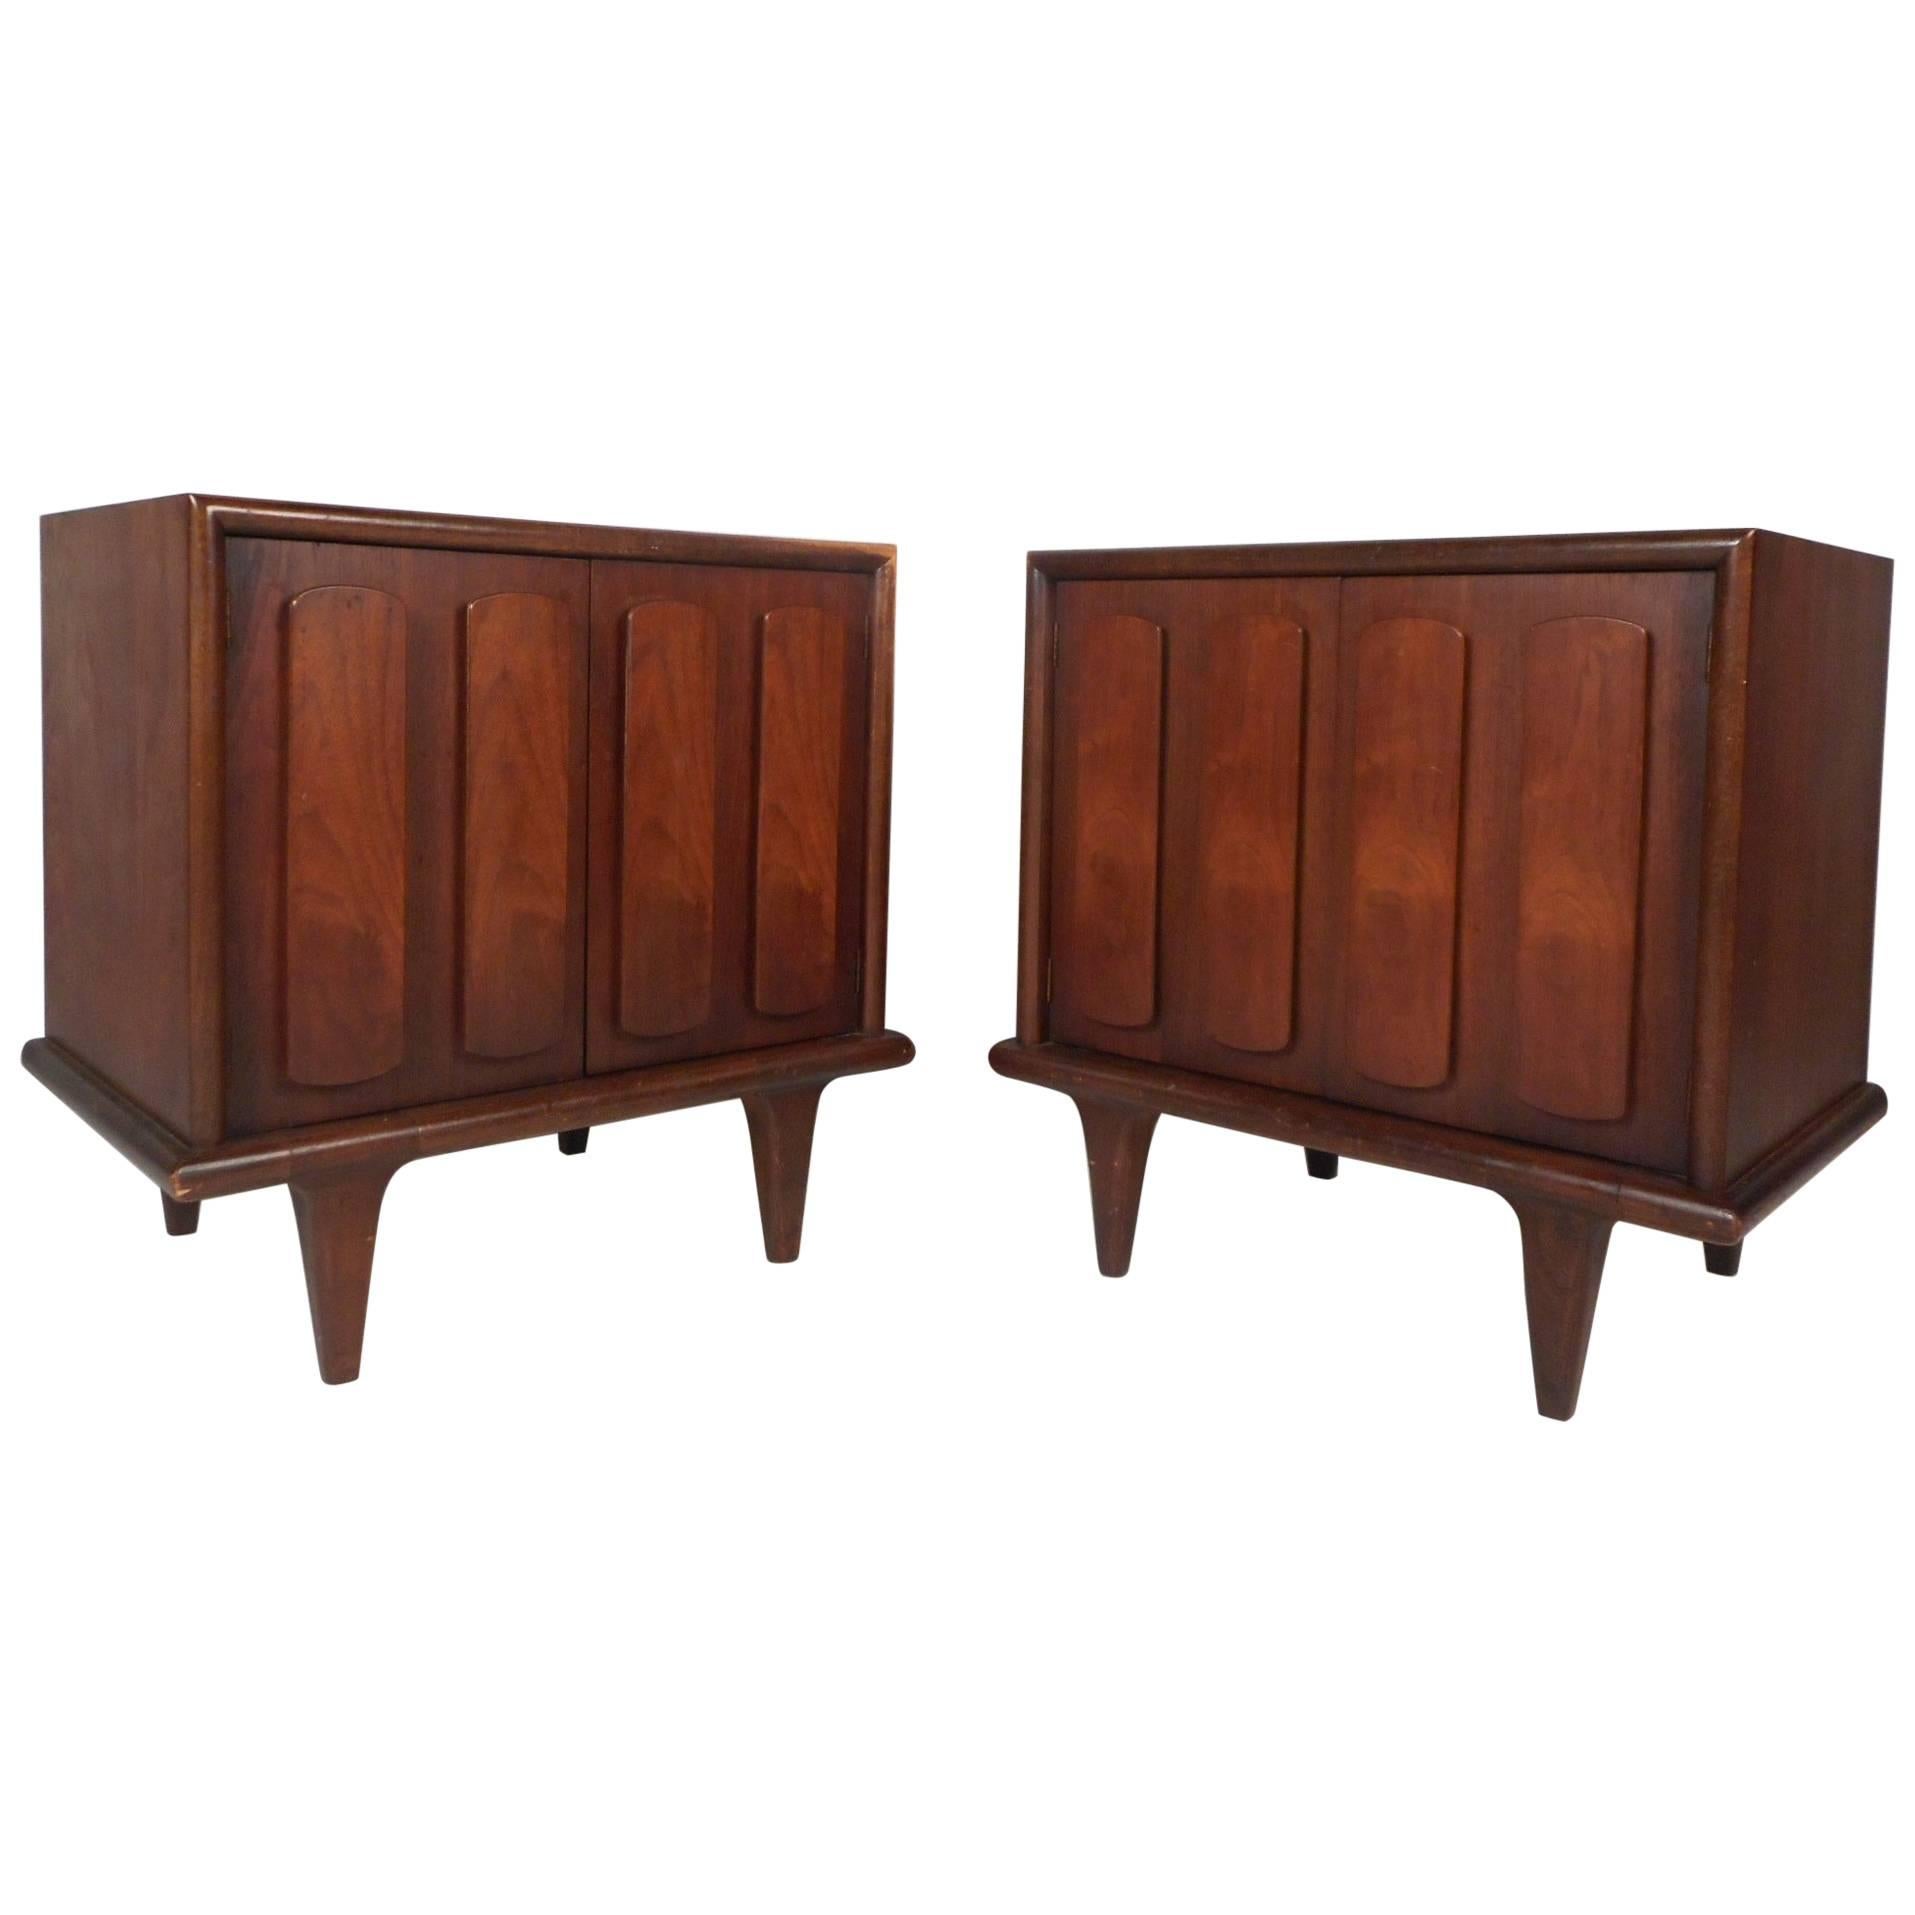 Pair of Walnut Nightstands by American of Martinsville